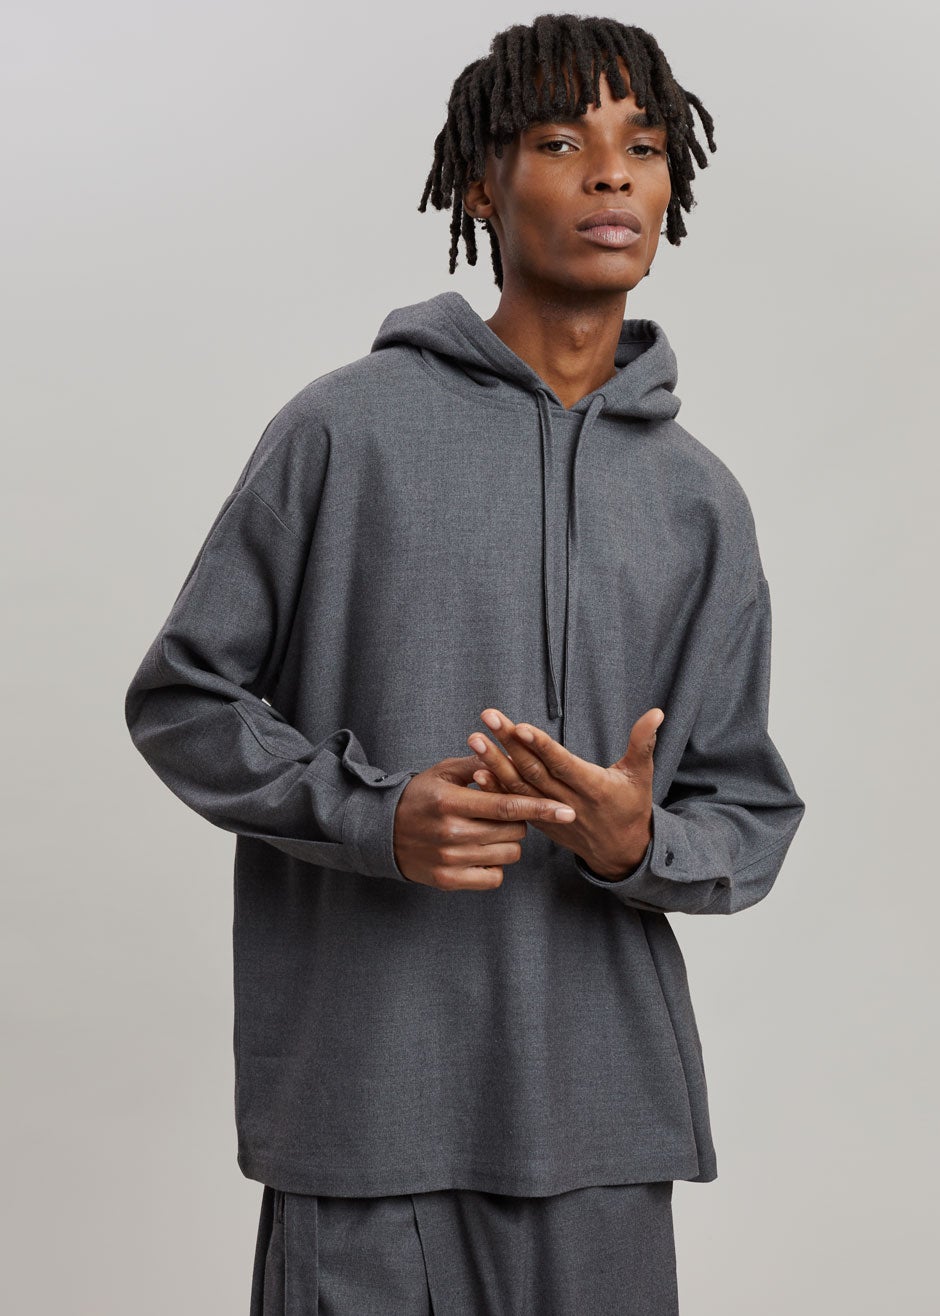 Heith Flanelle Hoodie - Charcoal